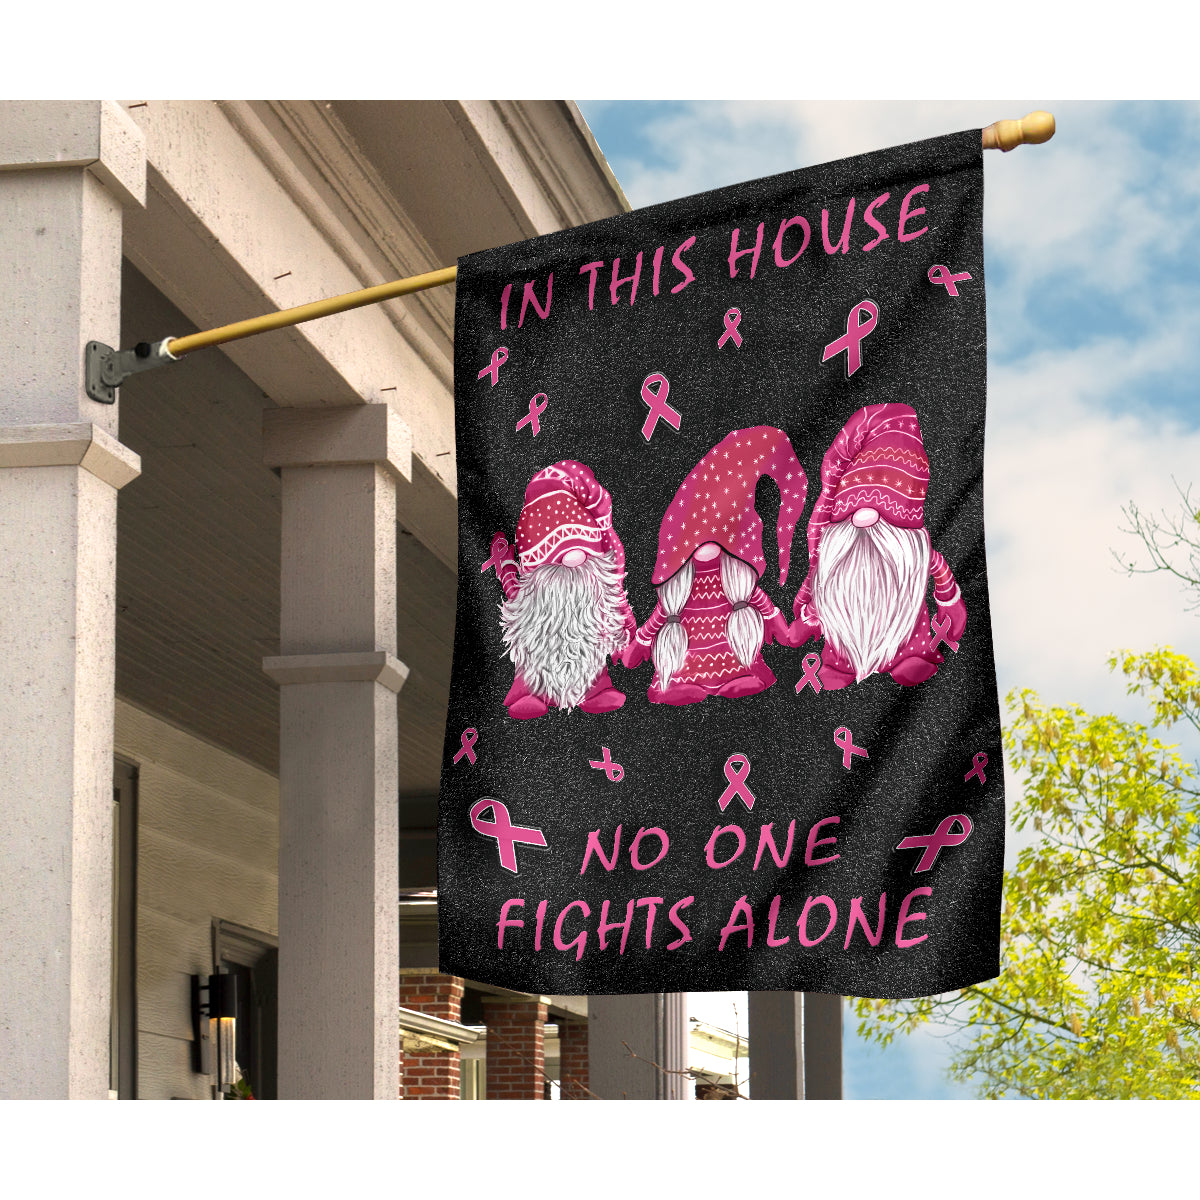 In This House We Never Give Up Flag Breast Cancer Awareness Garden Flag 0622